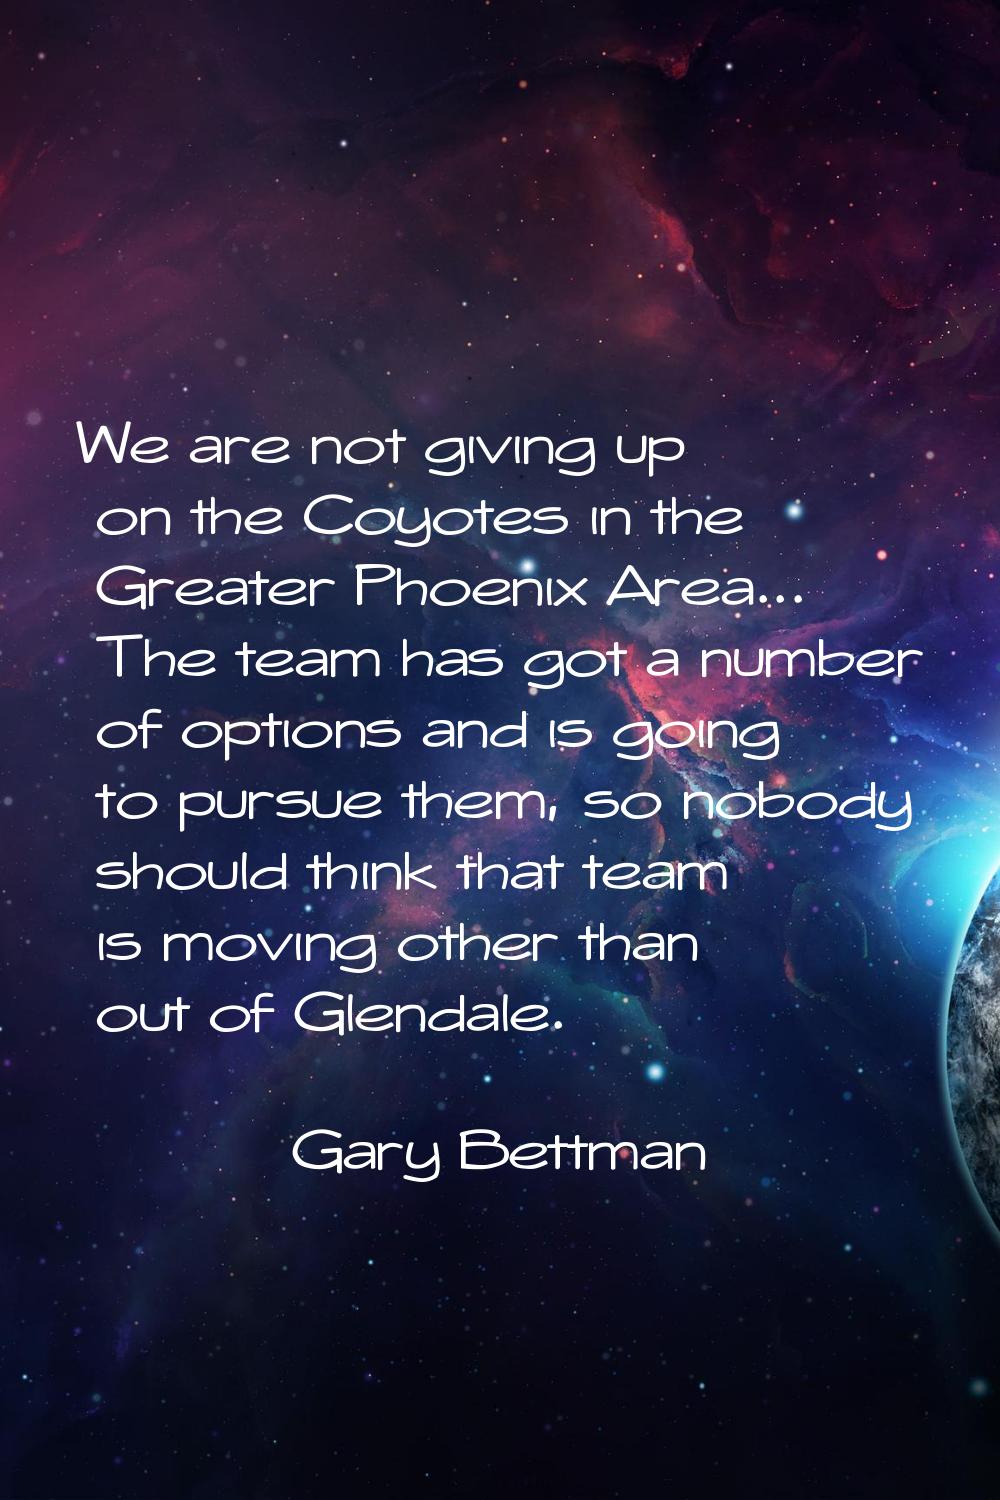 We are not giving up on the Coyotes in the Greater Phoenix Area... The team has got a number of opt